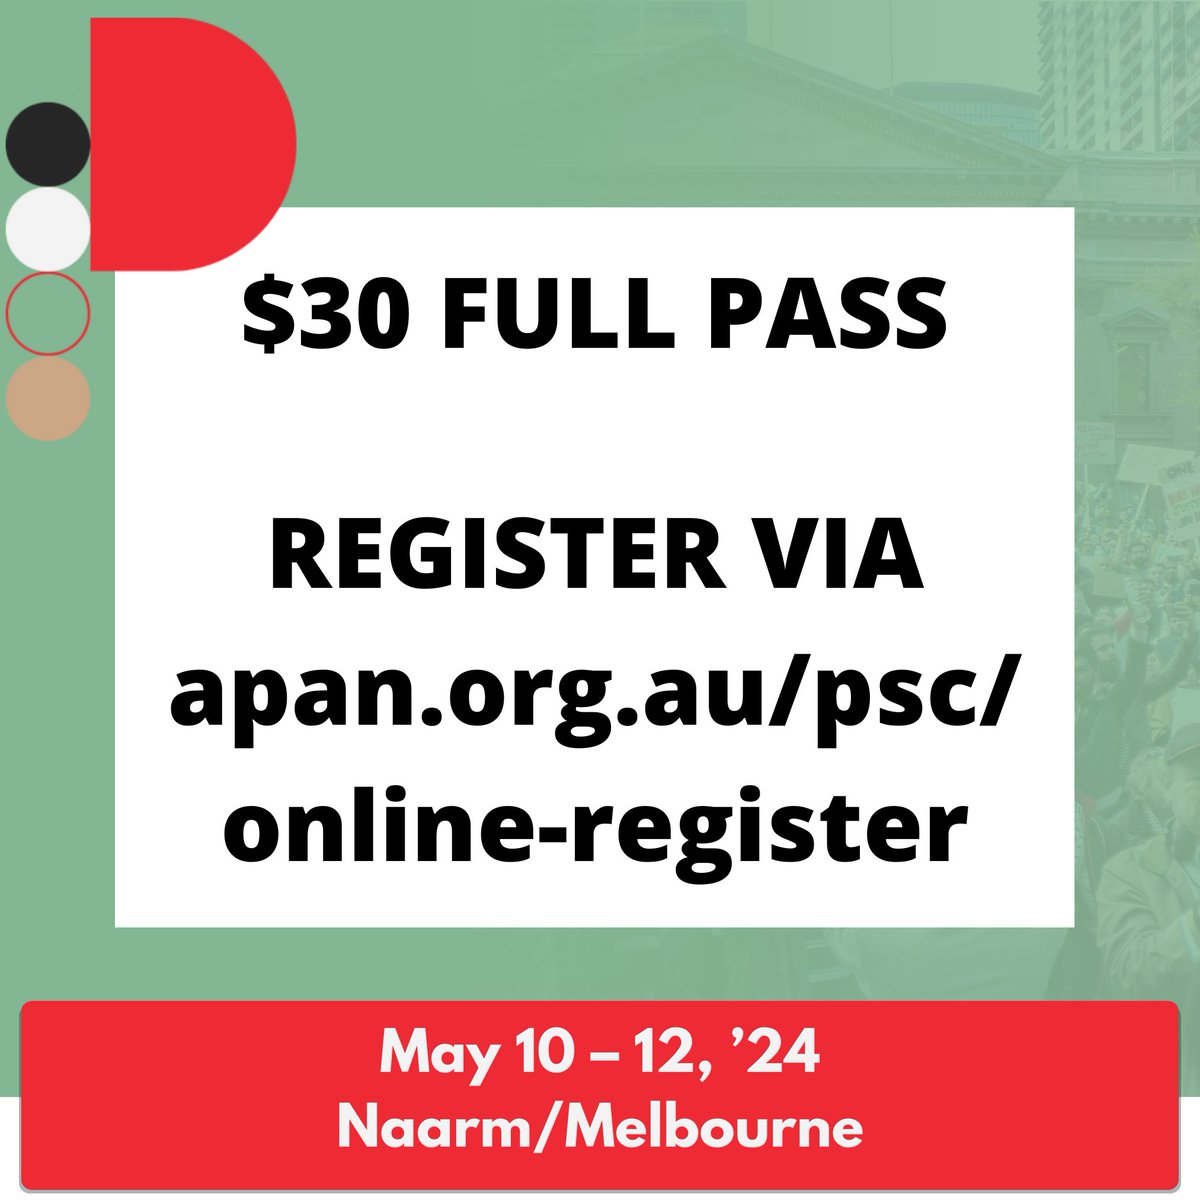 Online registration is now open for the 2024 Palestine Solidarity Conference - which will kick off tomorrow at 10am! You can get your tickets via apan.org.au/online-registe… to get your tickets!